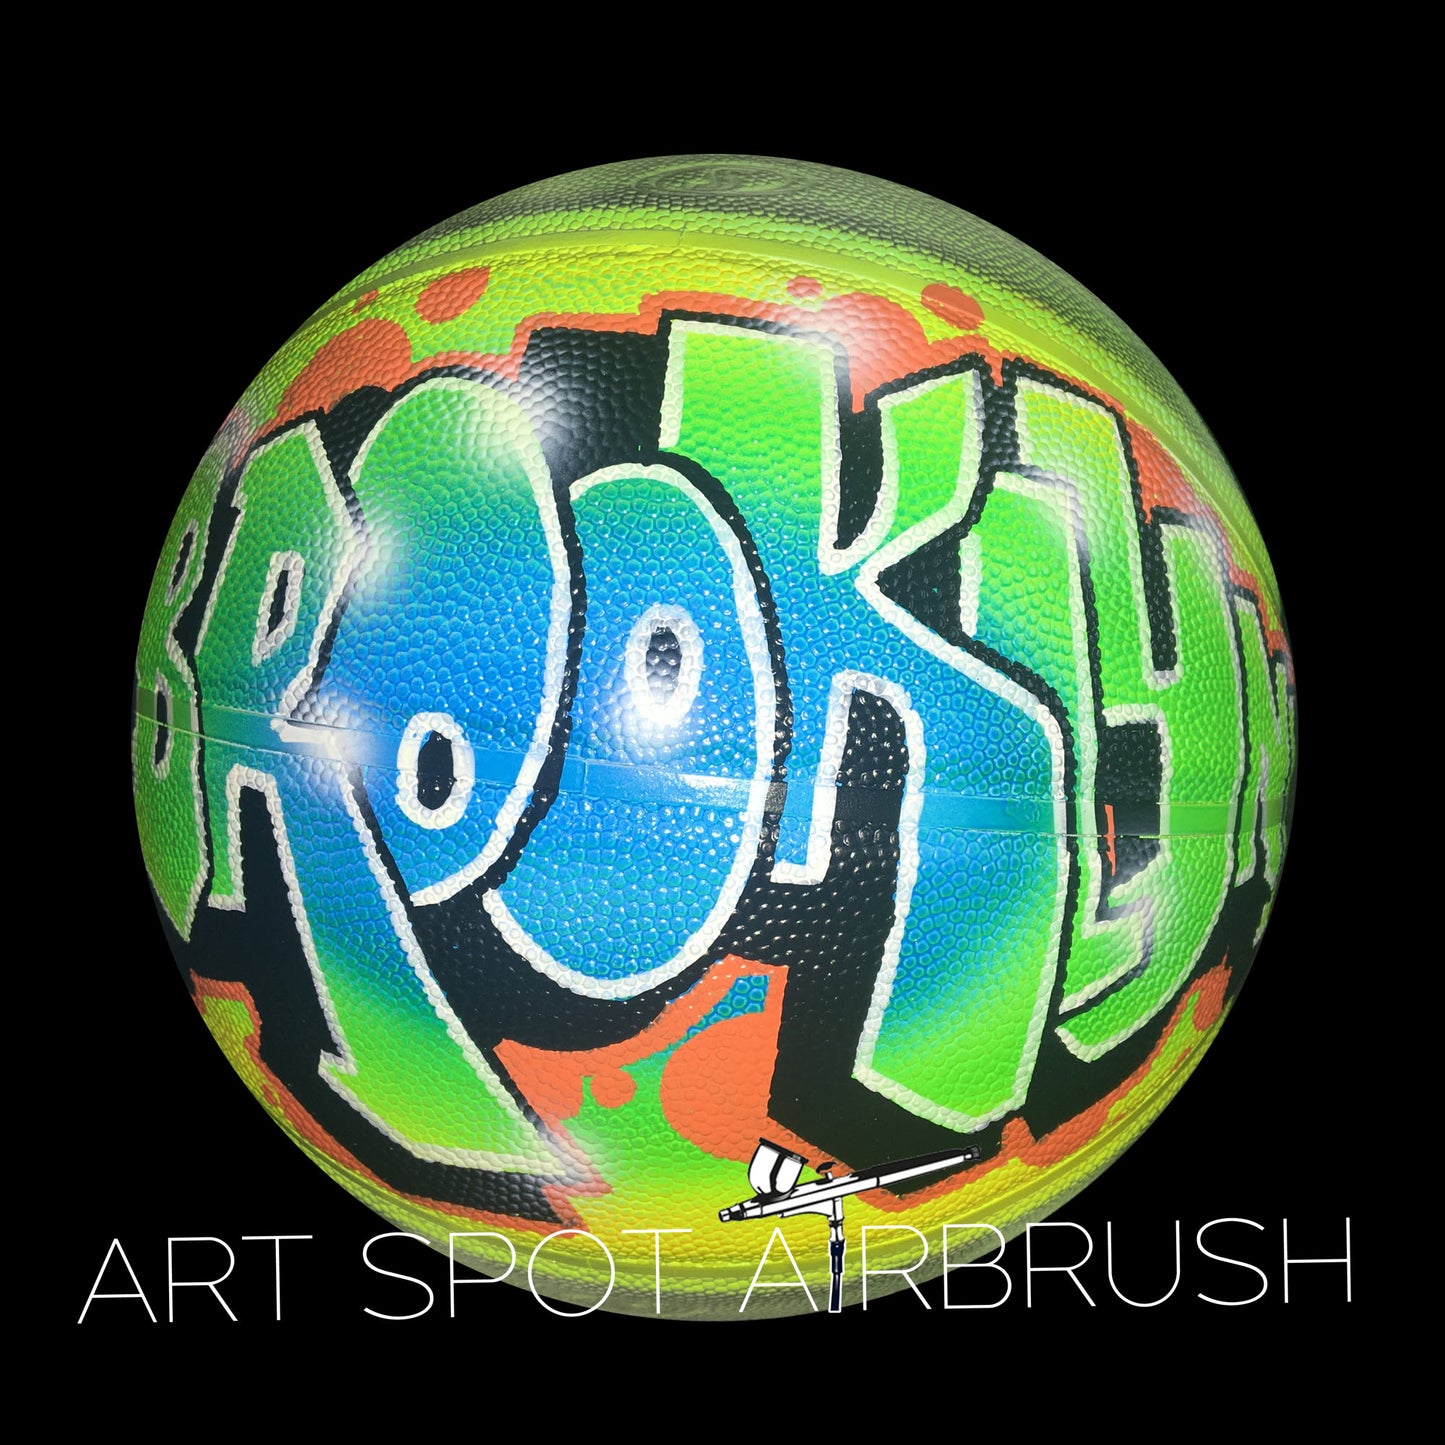 Personalized Basketball with a Name Painted in Custom Airbrush Graffiti